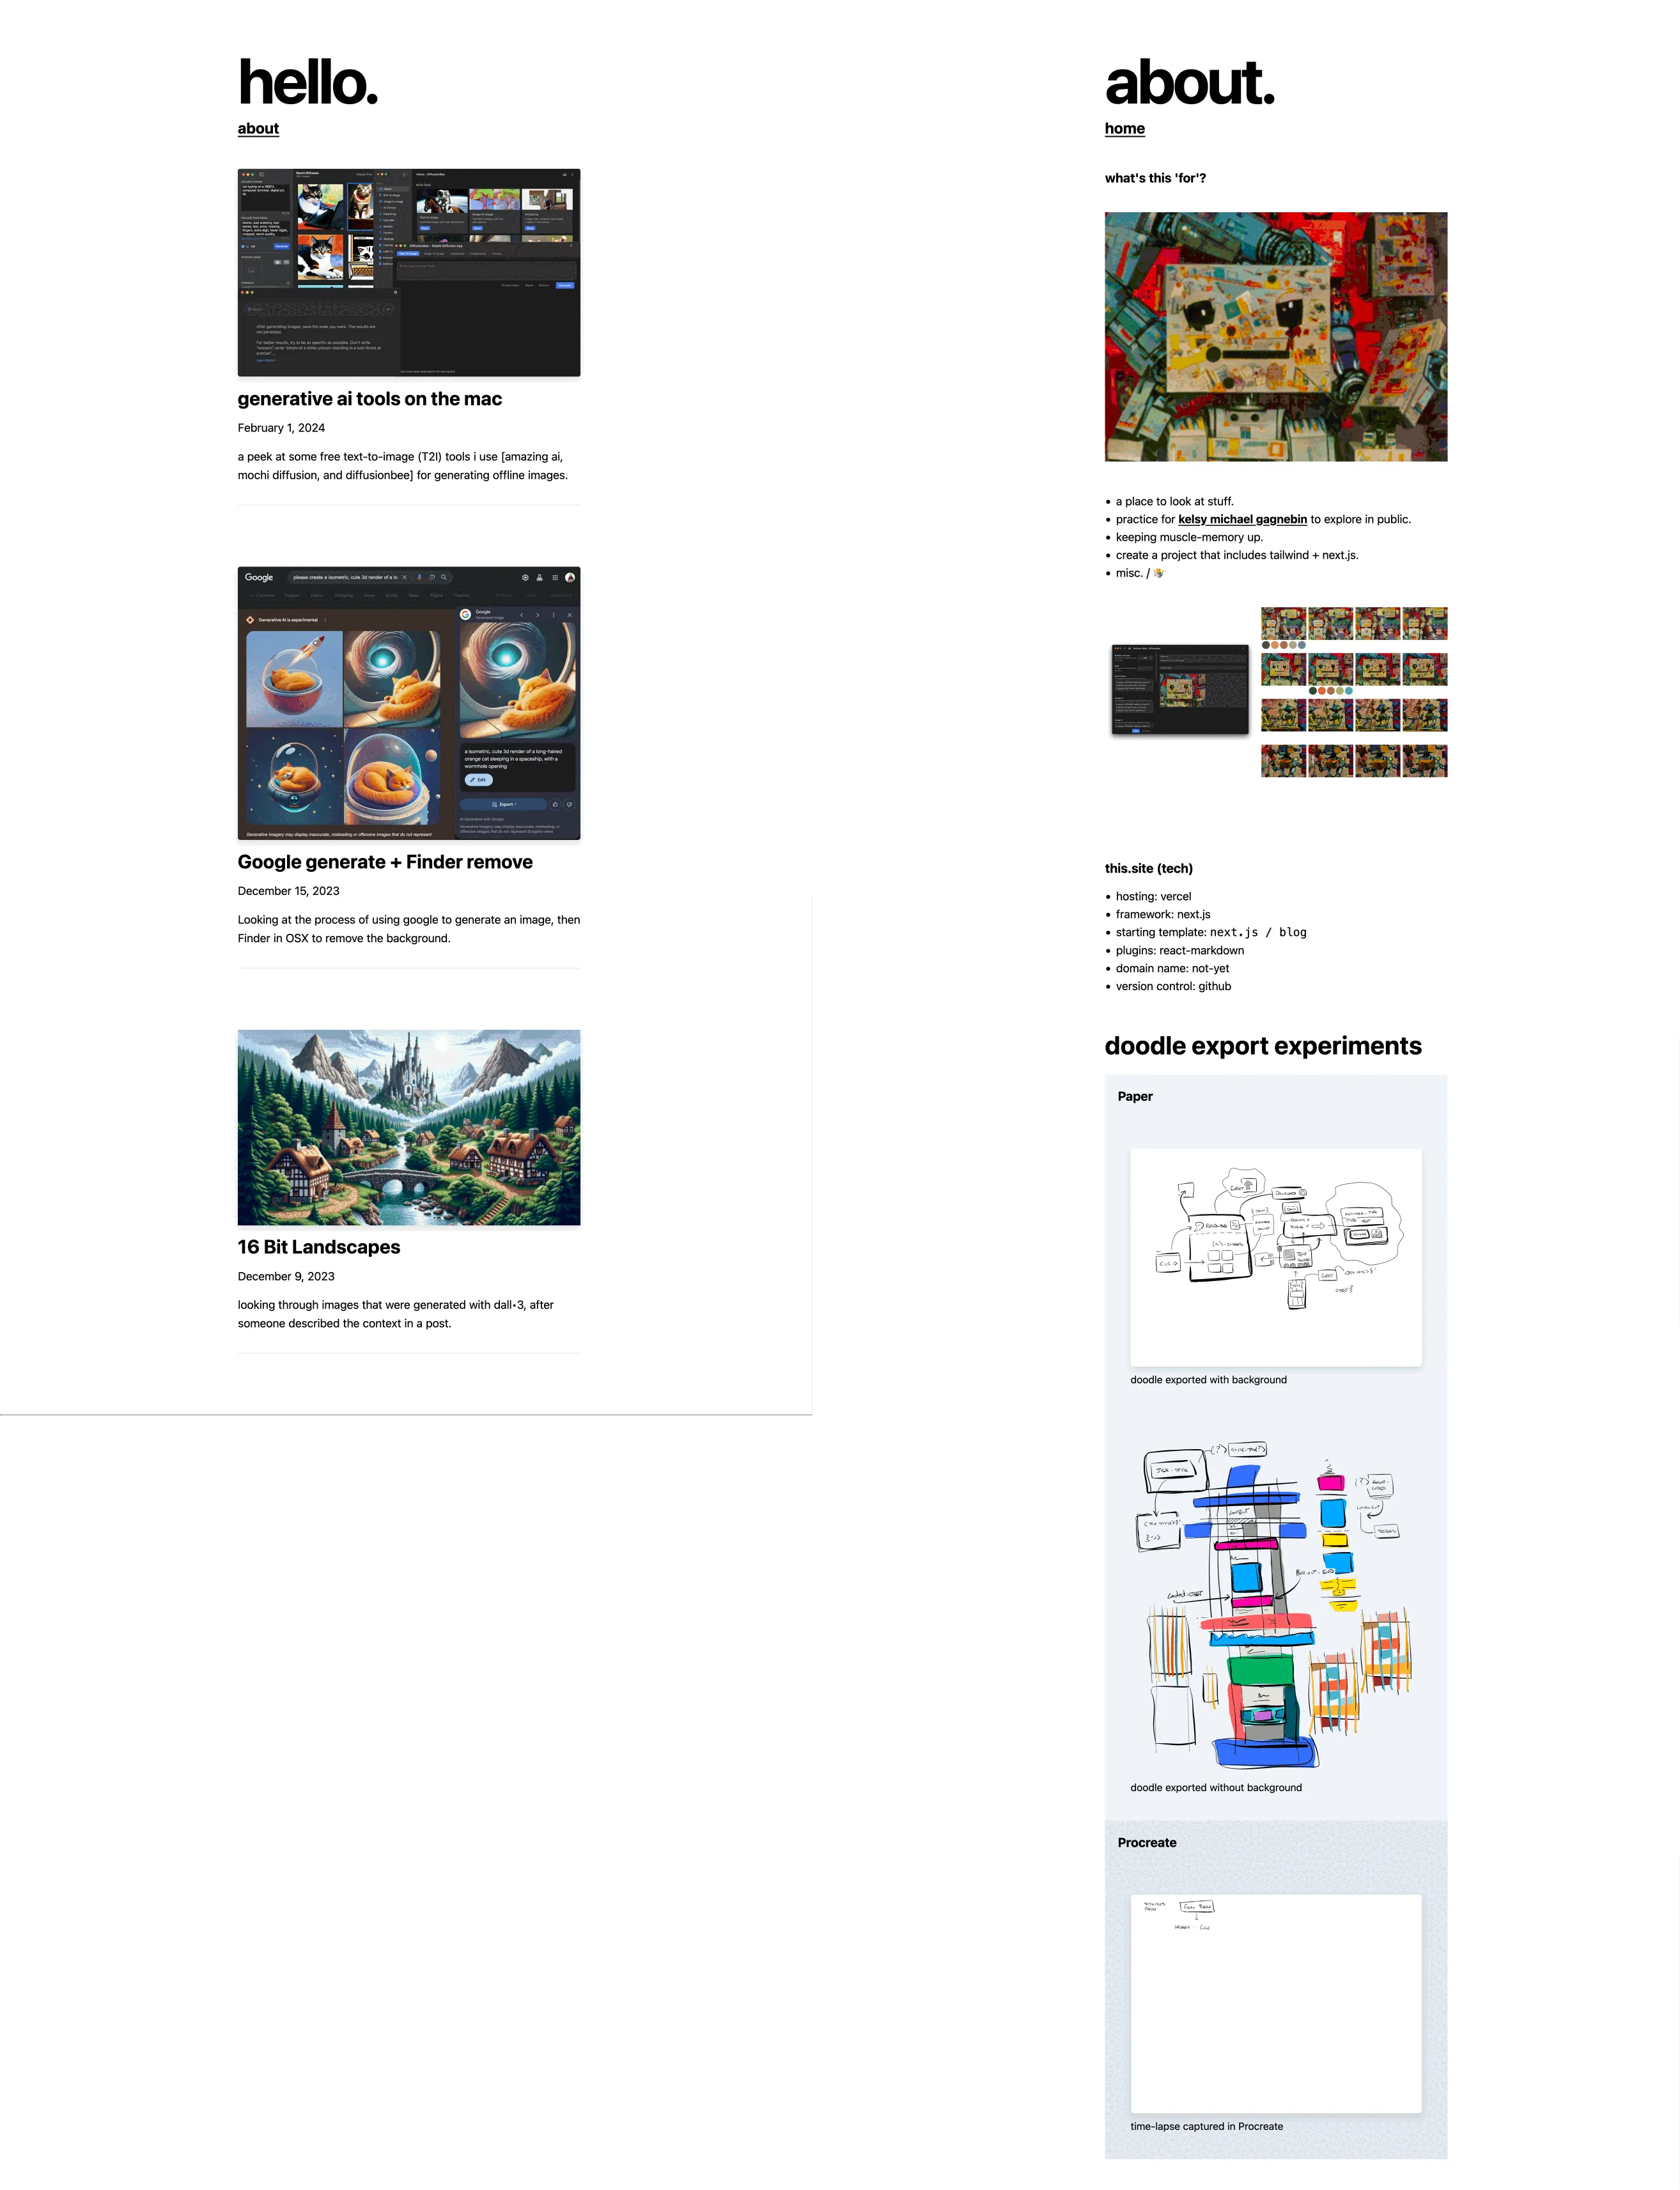 A webpage layout with two columns, one titled 'hello.' with a list of articles about generative AI tools, and another titled 'about.' showcasing images of different artworks and creative projects